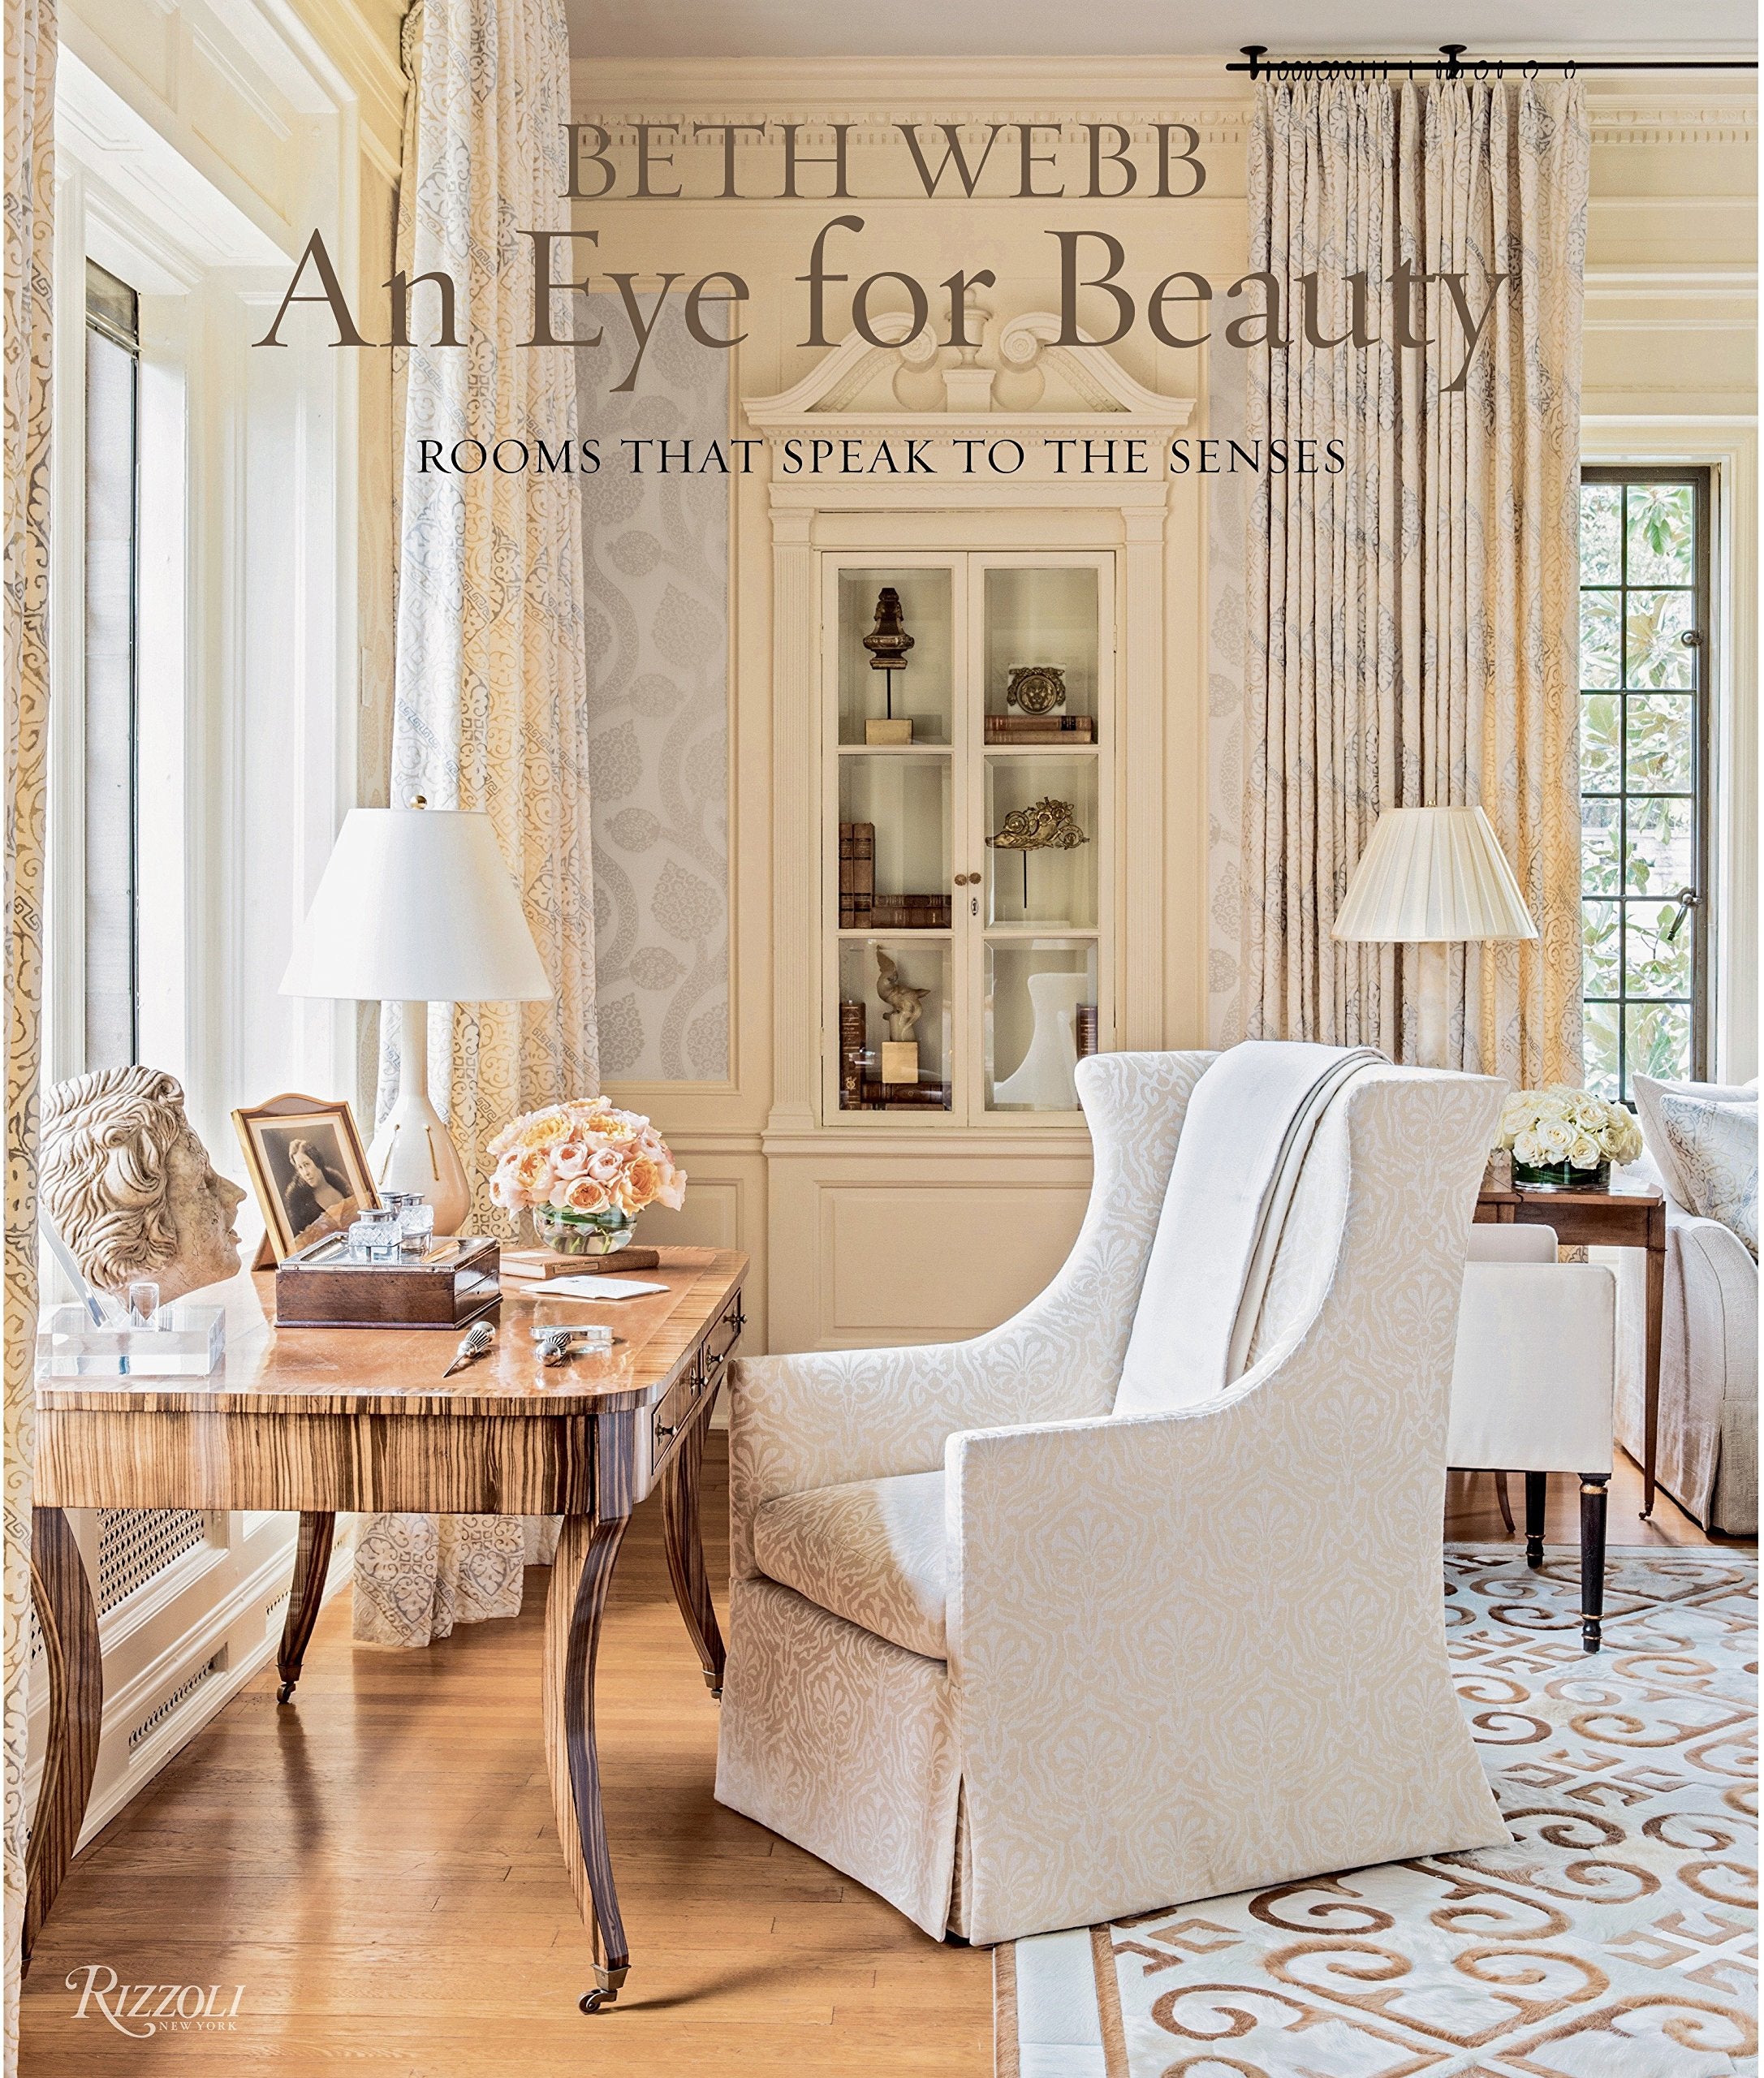 An Eye for Beauty: Rooms That Speak to the Senses